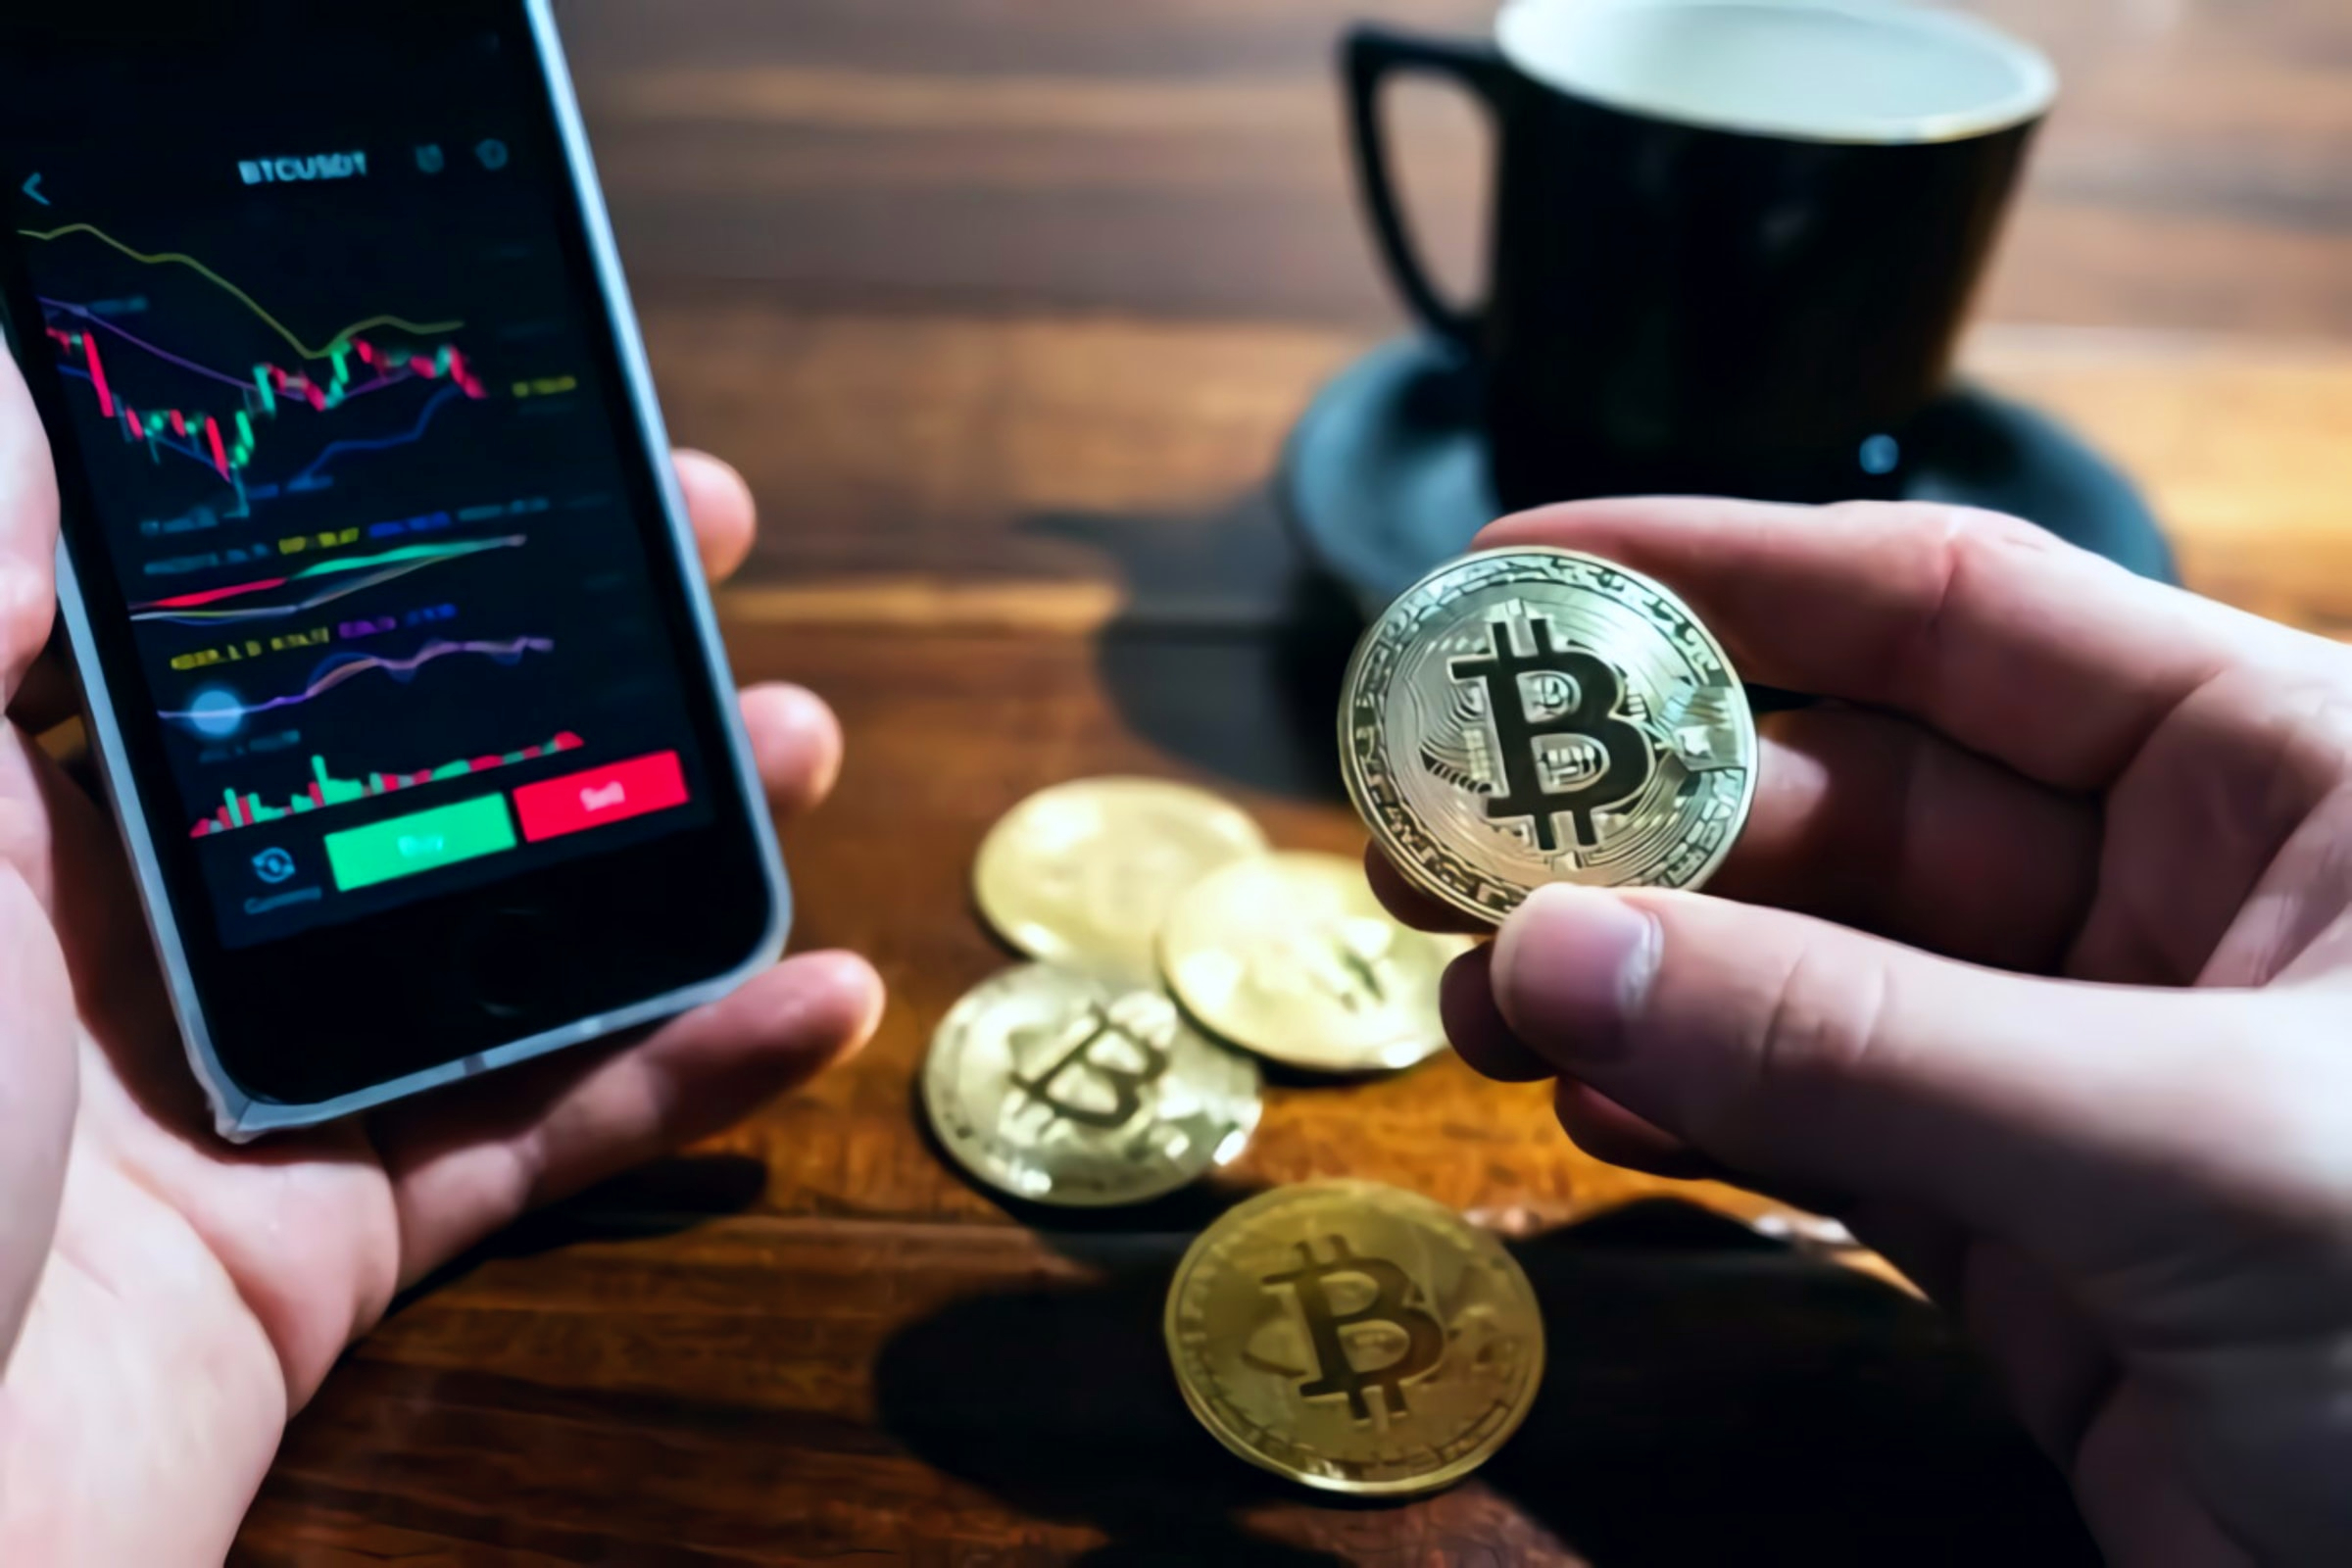 Bitcoin (BTC) slightly rebounds from early losses